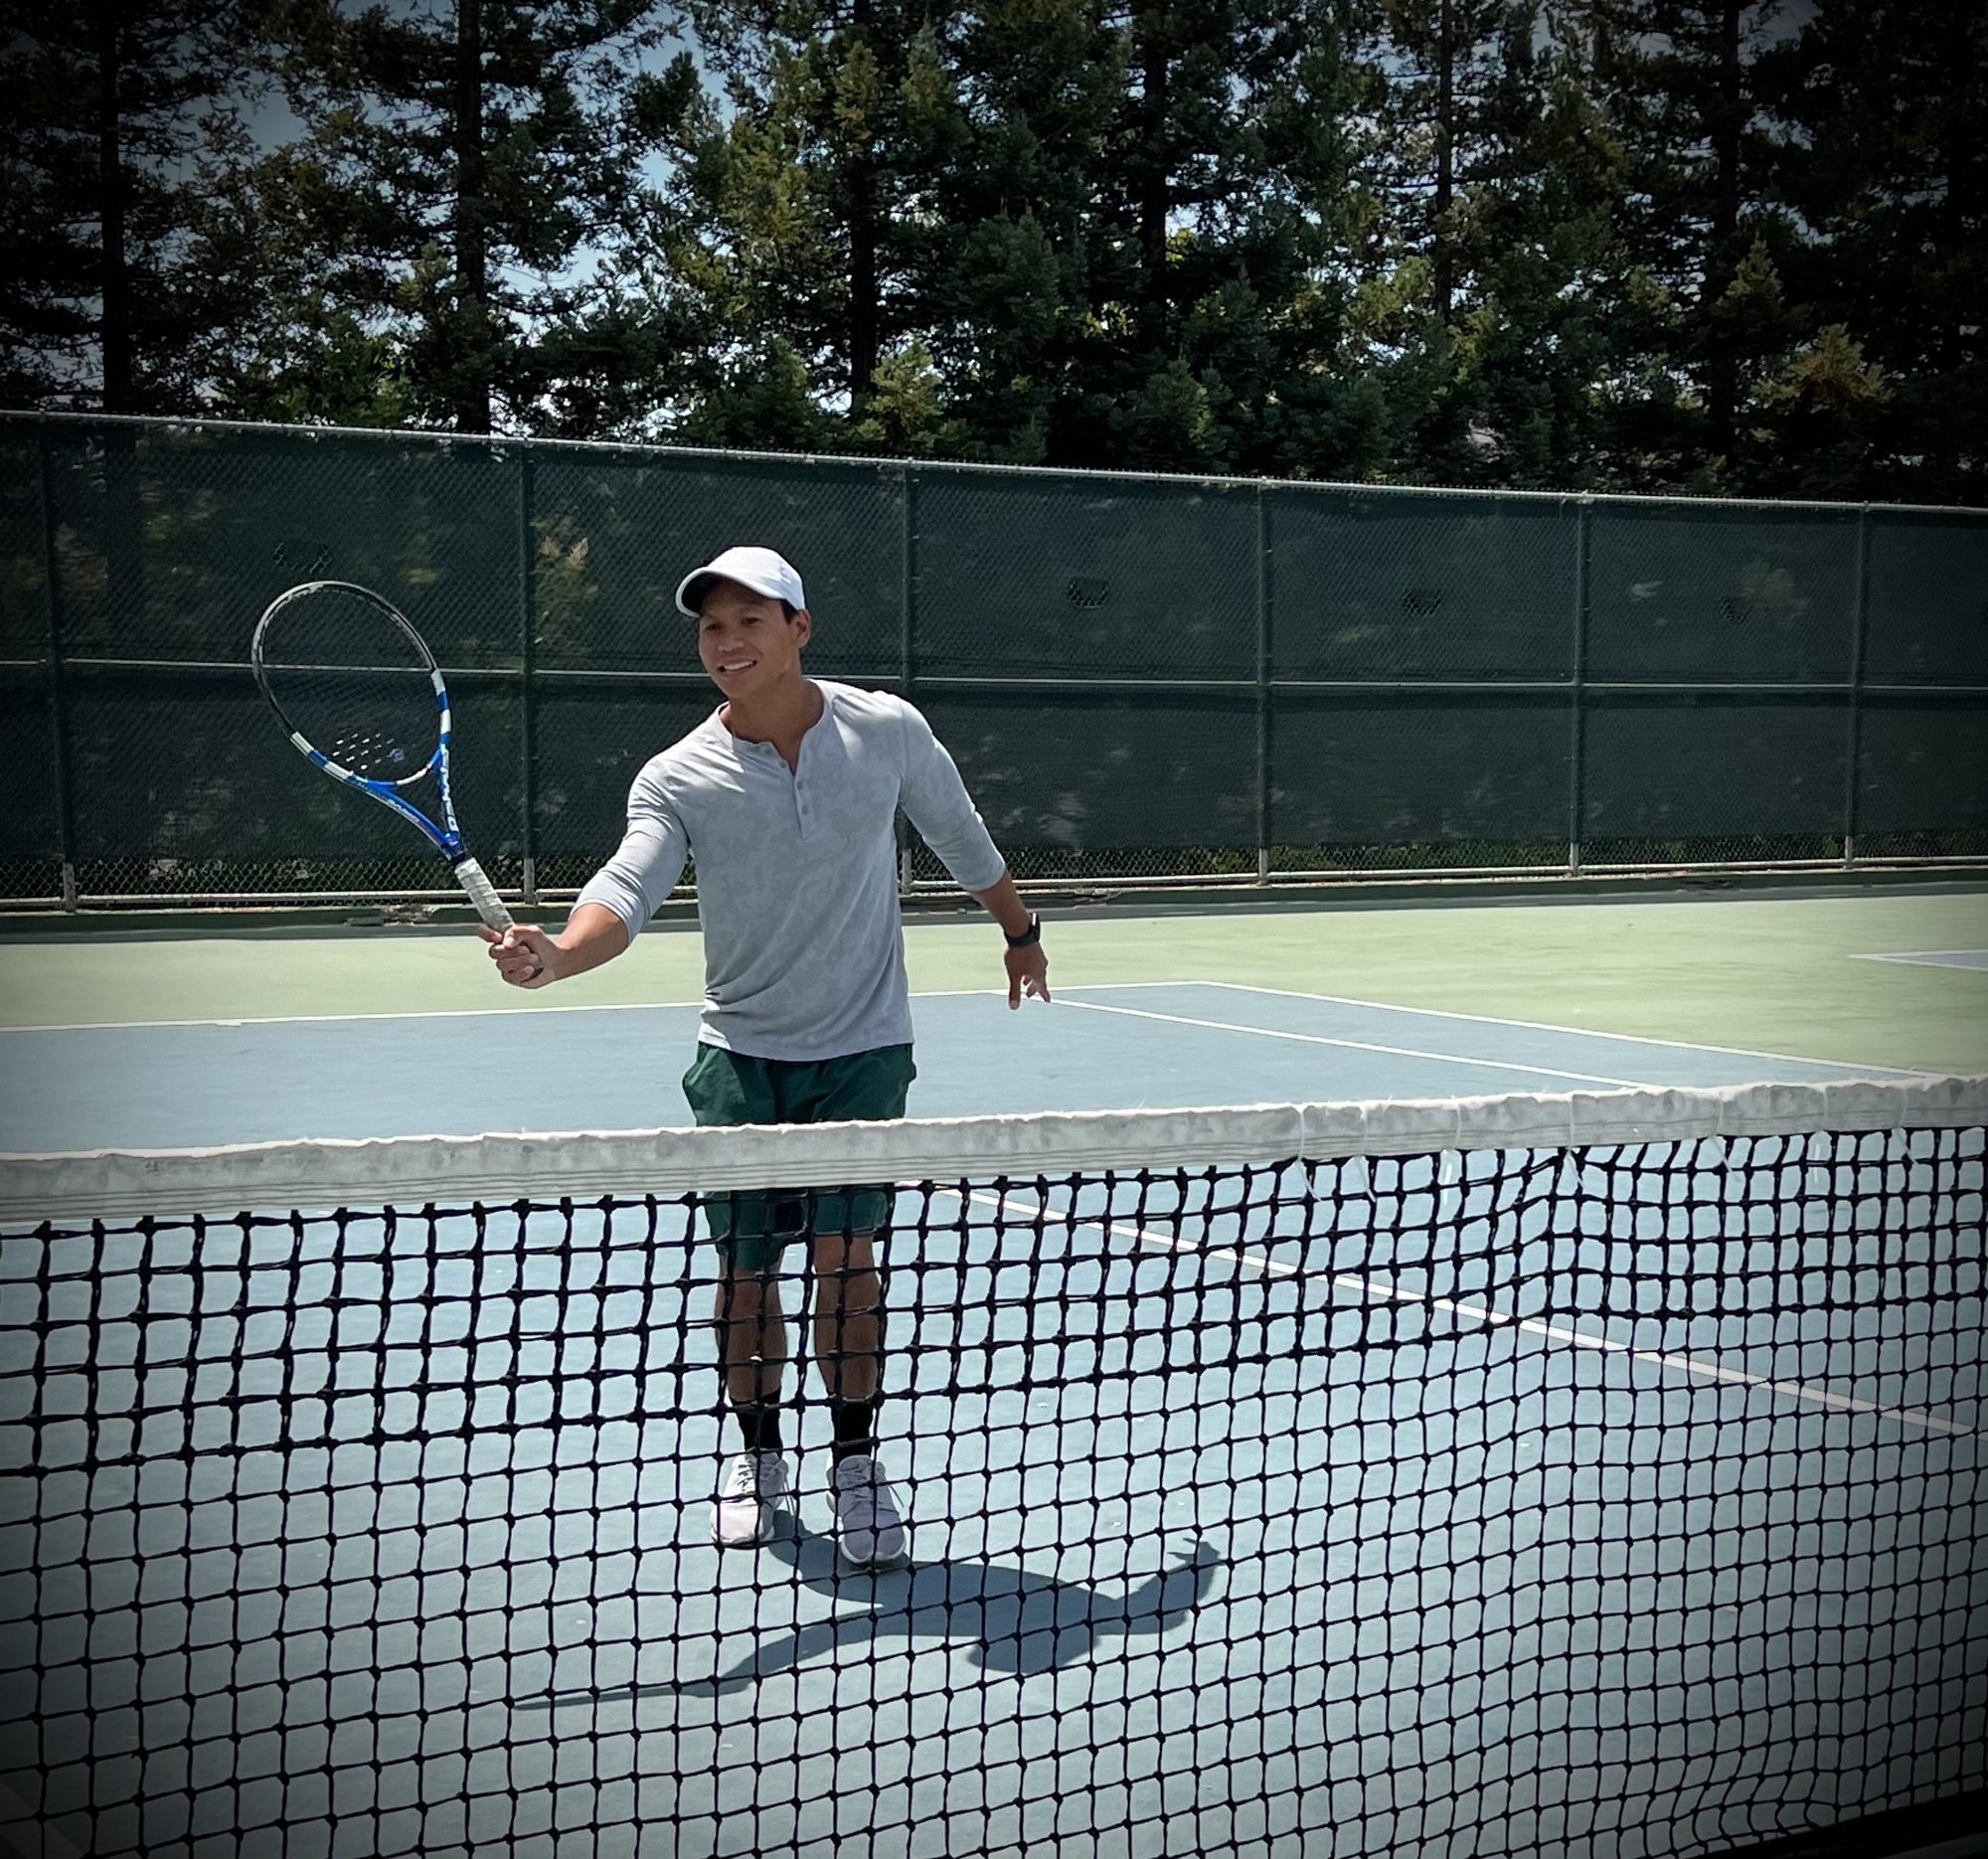 Mike A. teaches tennis lessons in Fremont, CA